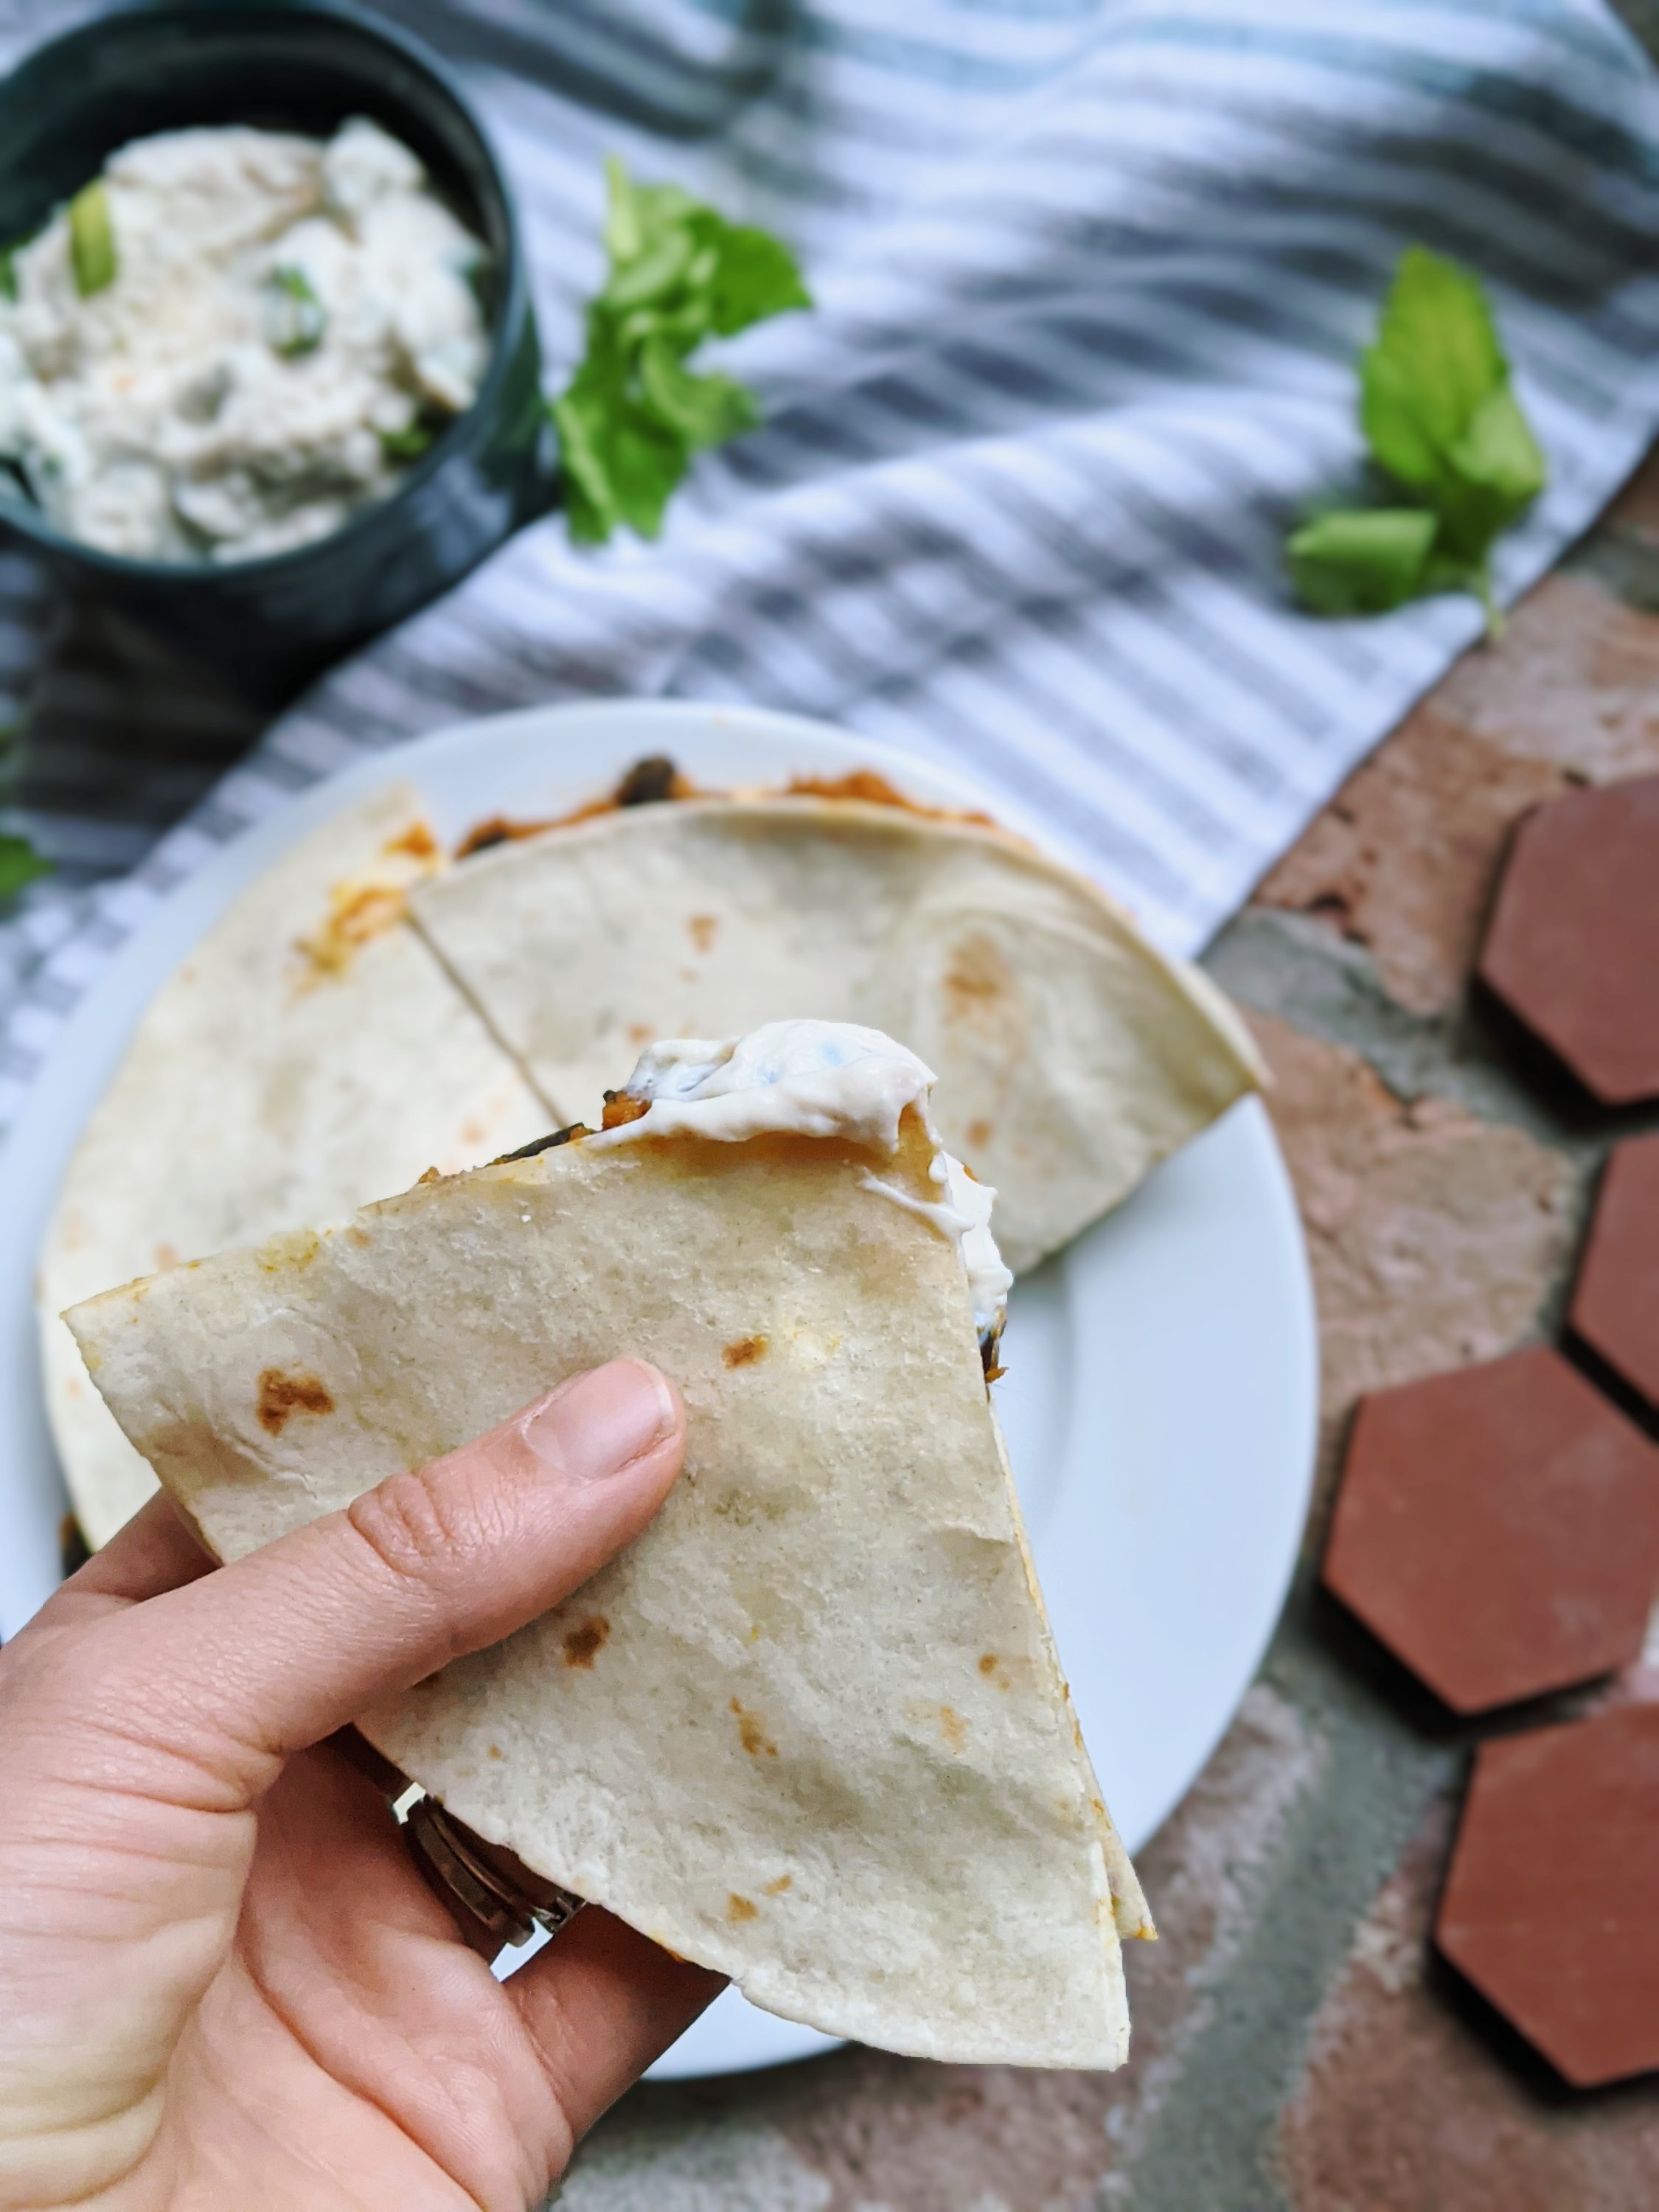 vegan pumpkin recipes quesadillas with no cheese vegetarian meal prep make ahead dinners for adults kid friendly 10 minute recipes everyone will love healthy